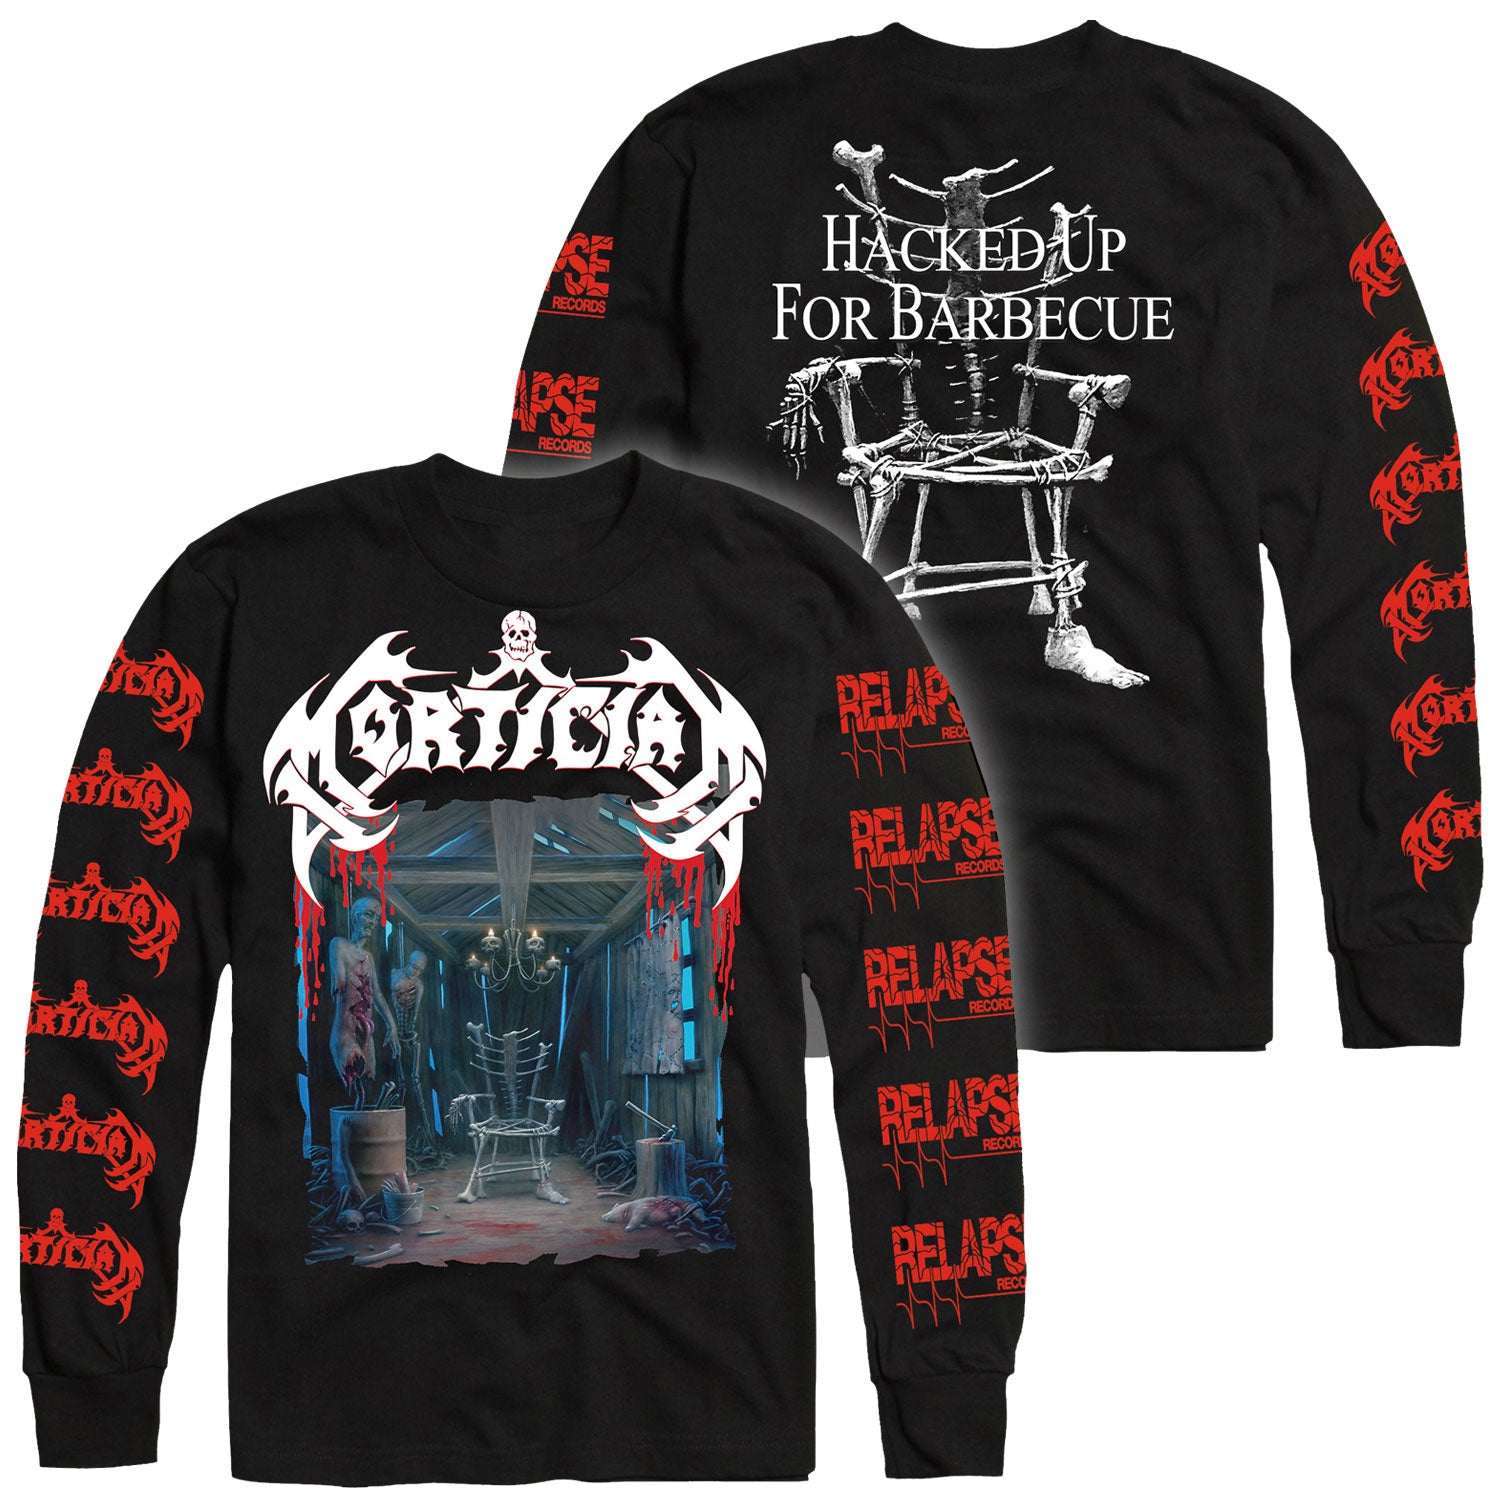 Mortician "Hacked Up For Barbecue" Longsleeve